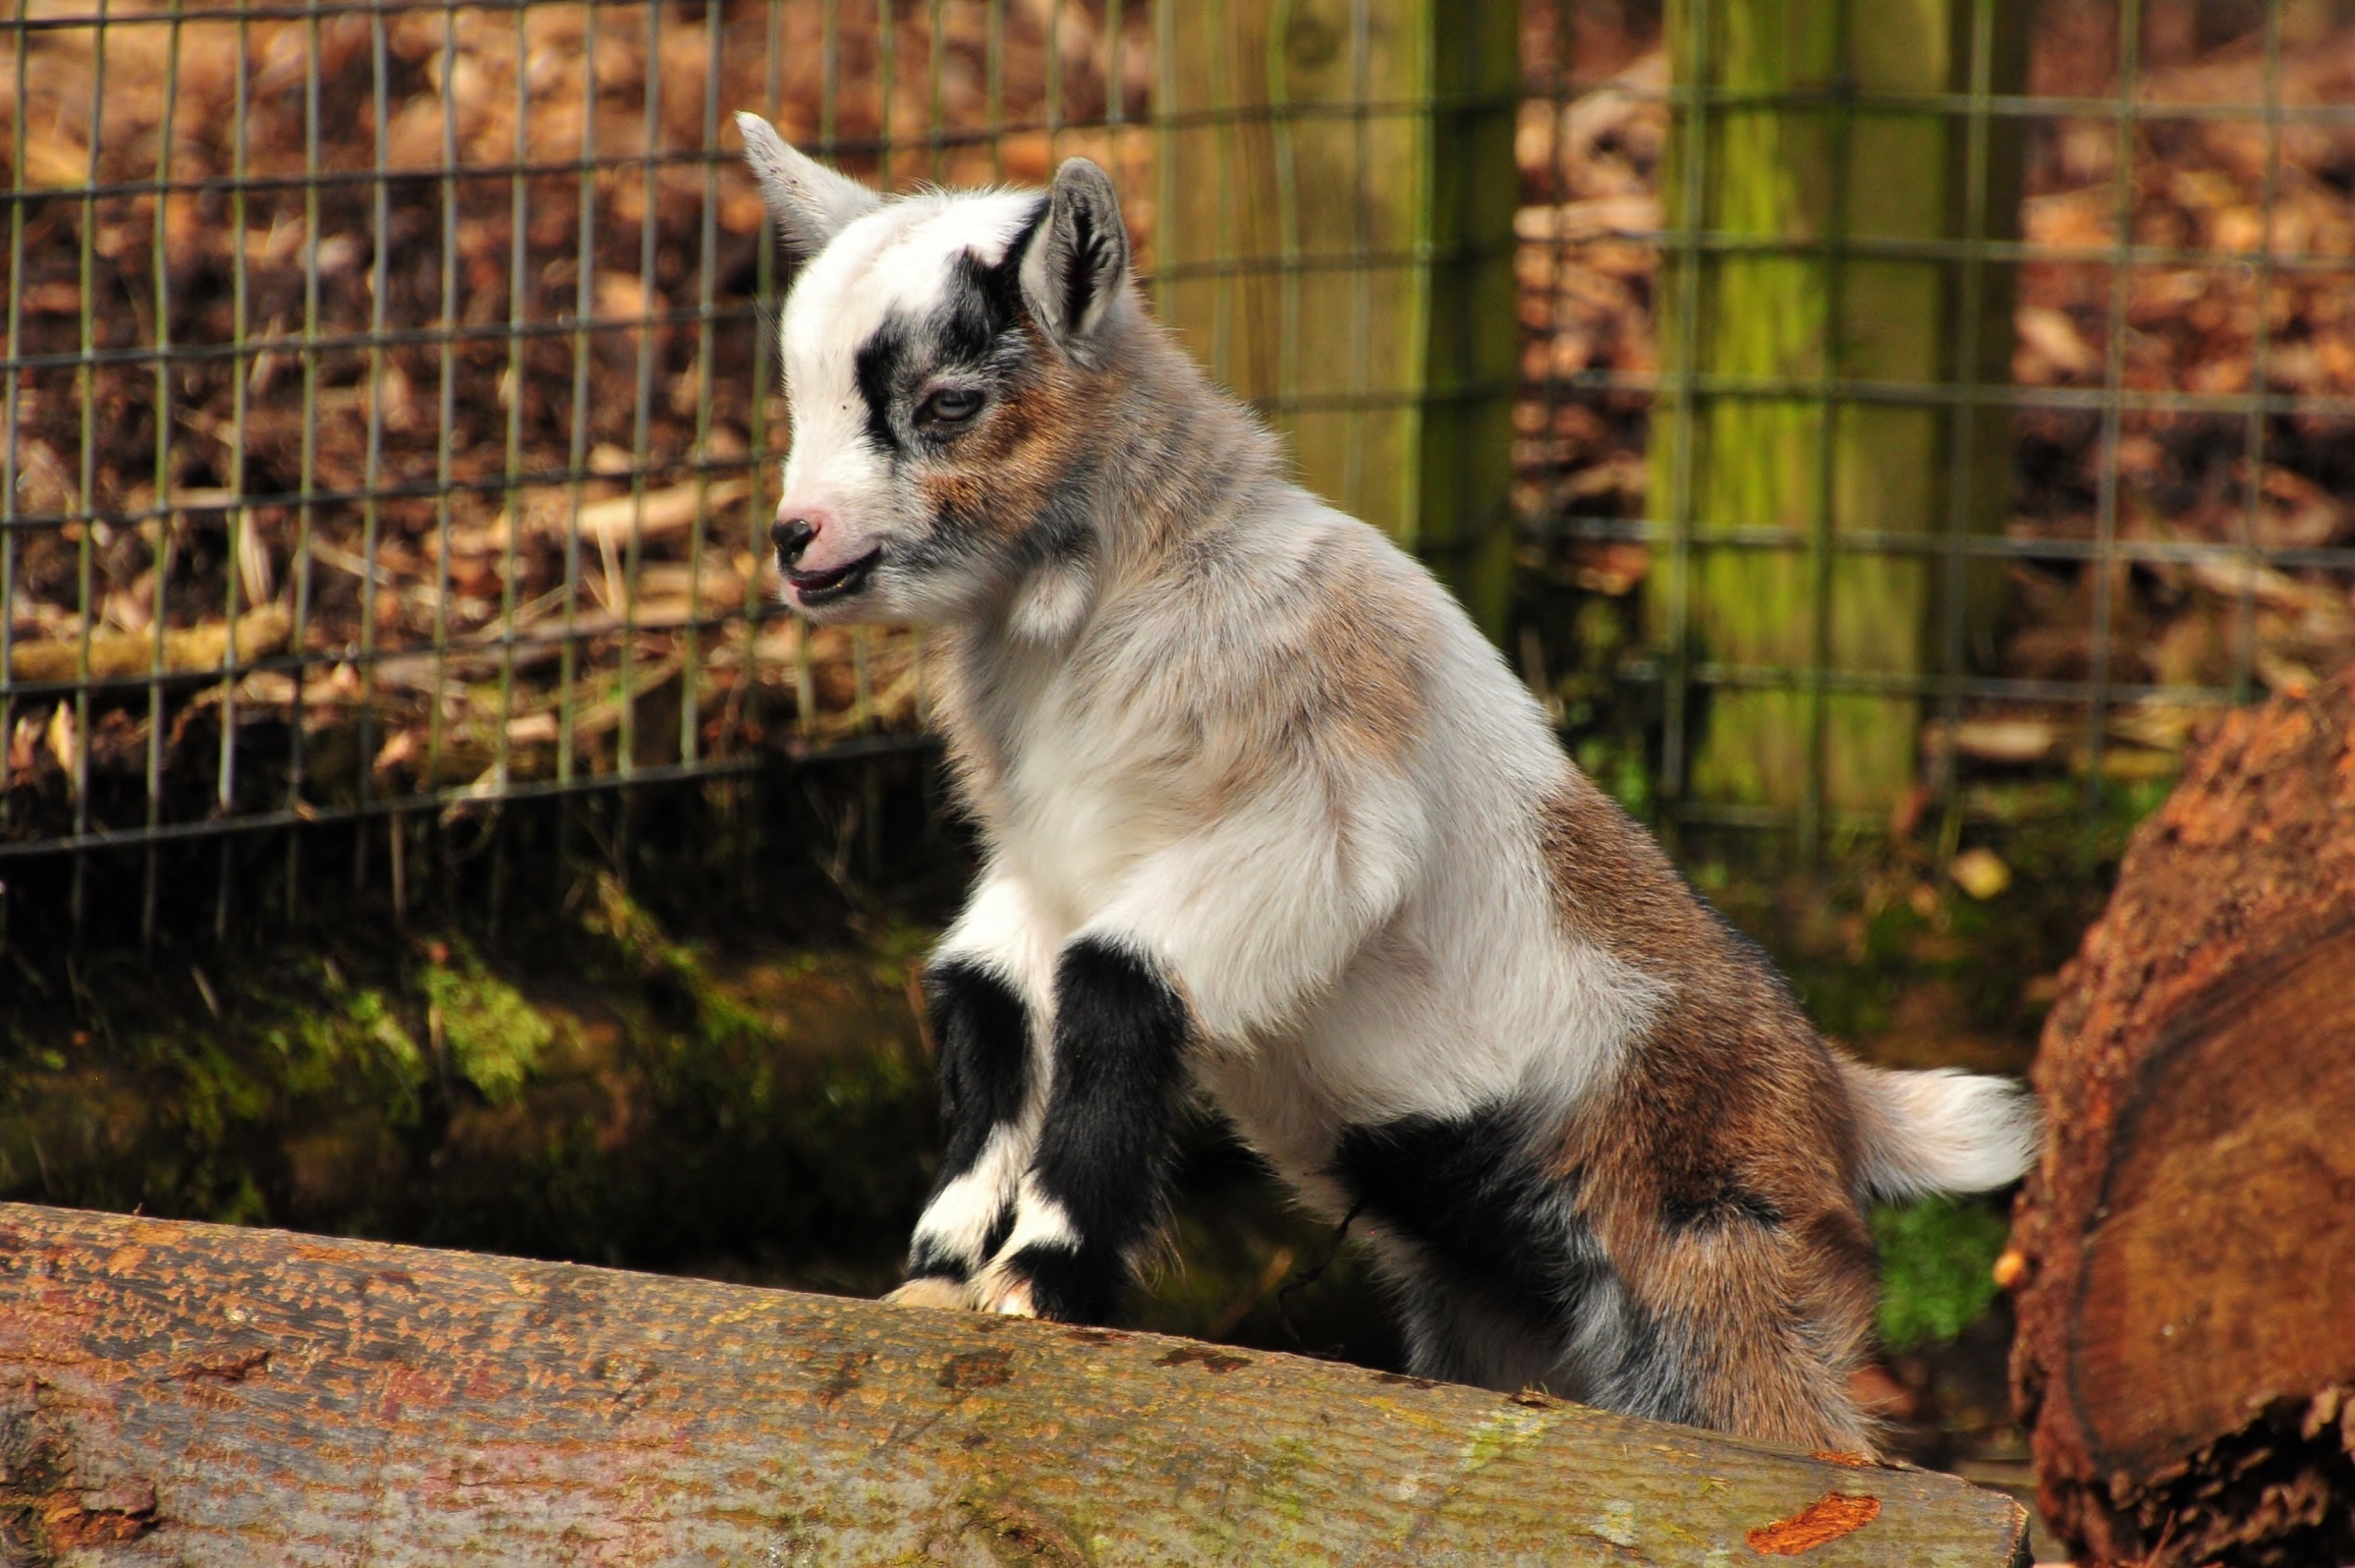 The African pygmy goats have welcomed new arrivals